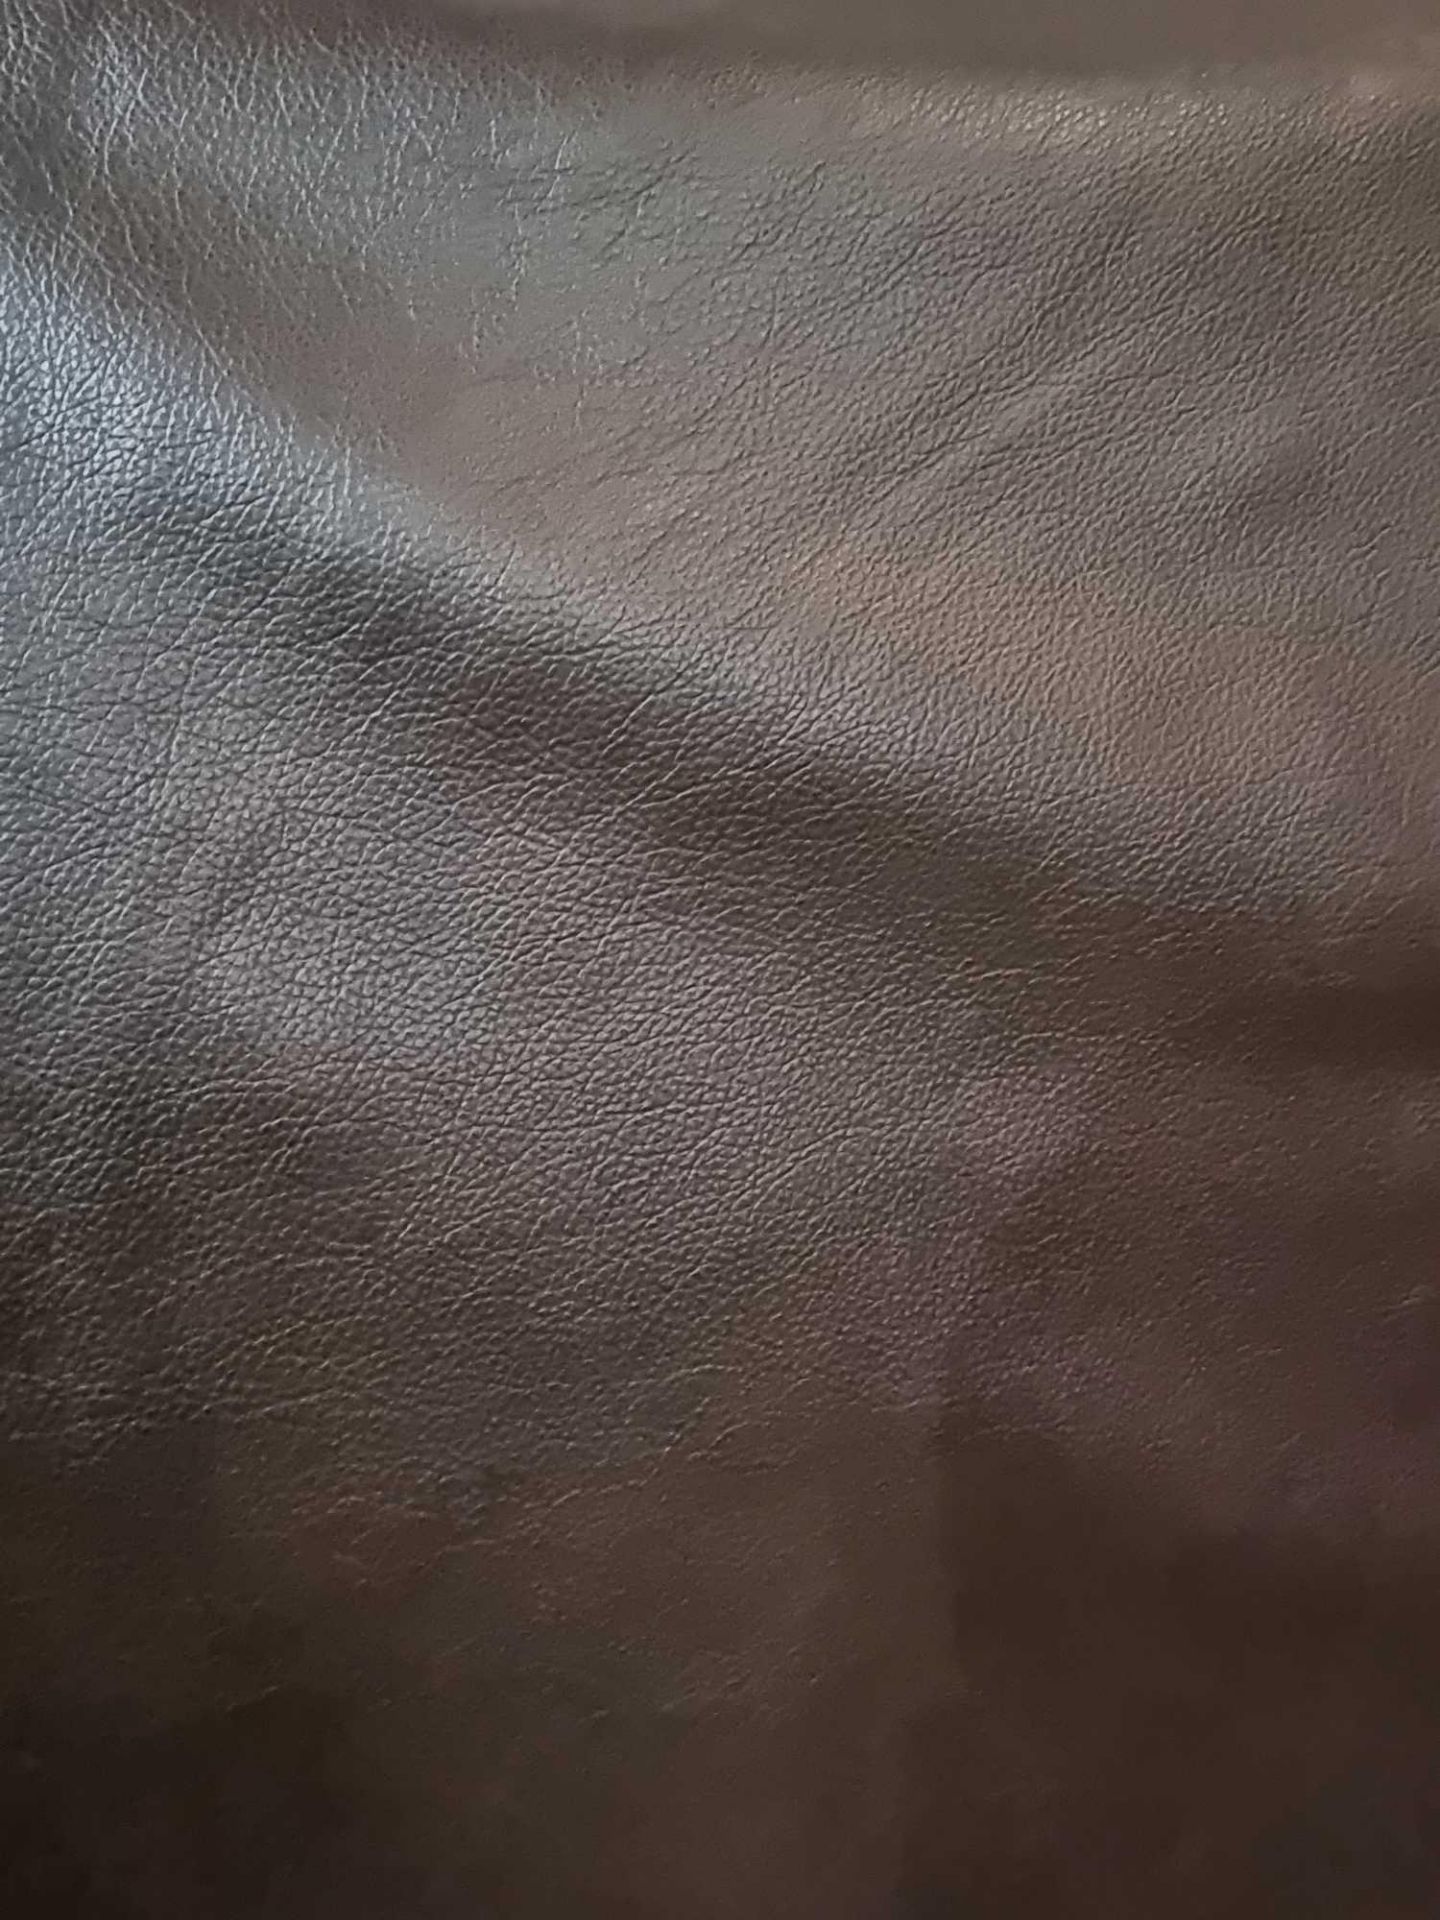 Mastrotto Hudson Chocolate Leather Hide approximately 2 7M2 1 8 x 1 5cm ( Hide No,249) - Image 2 of 2